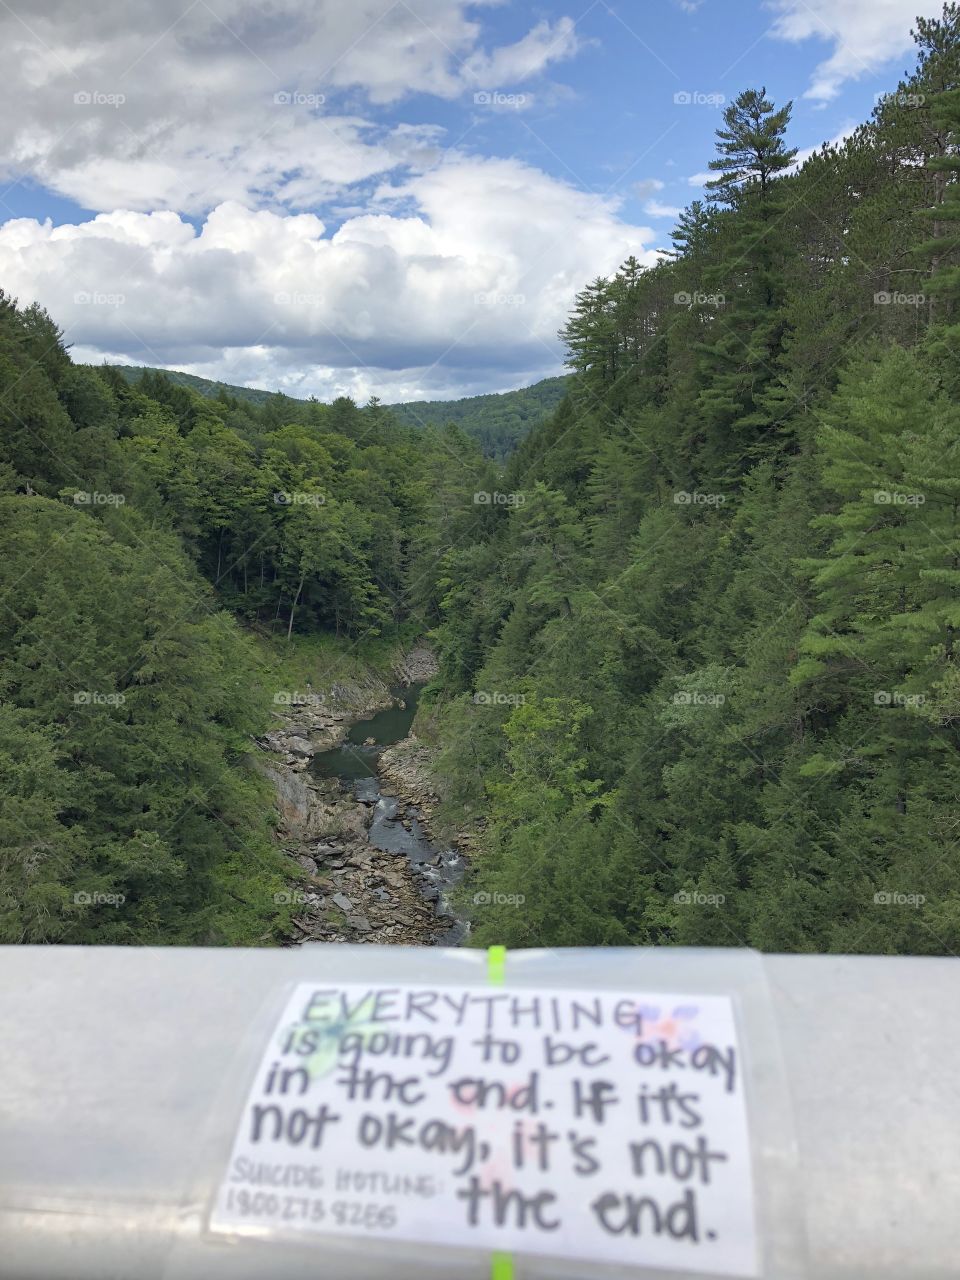 Inspirational quote over the gorge.